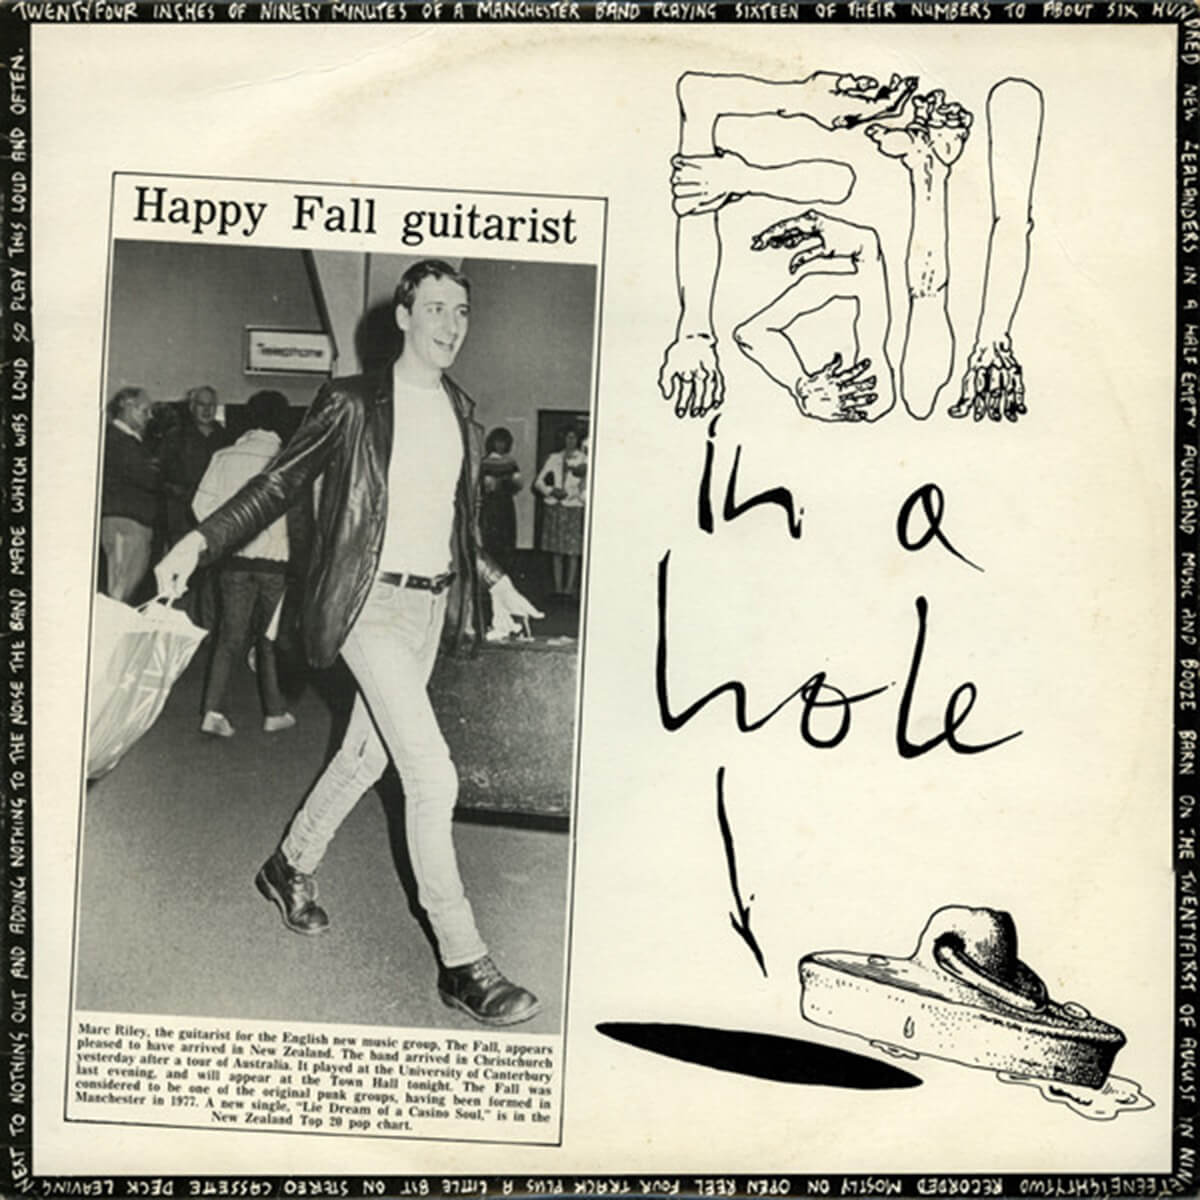 The Fall's <em>Fall In A Hole</em>, originally released by New Zealand's Flying Nun label.